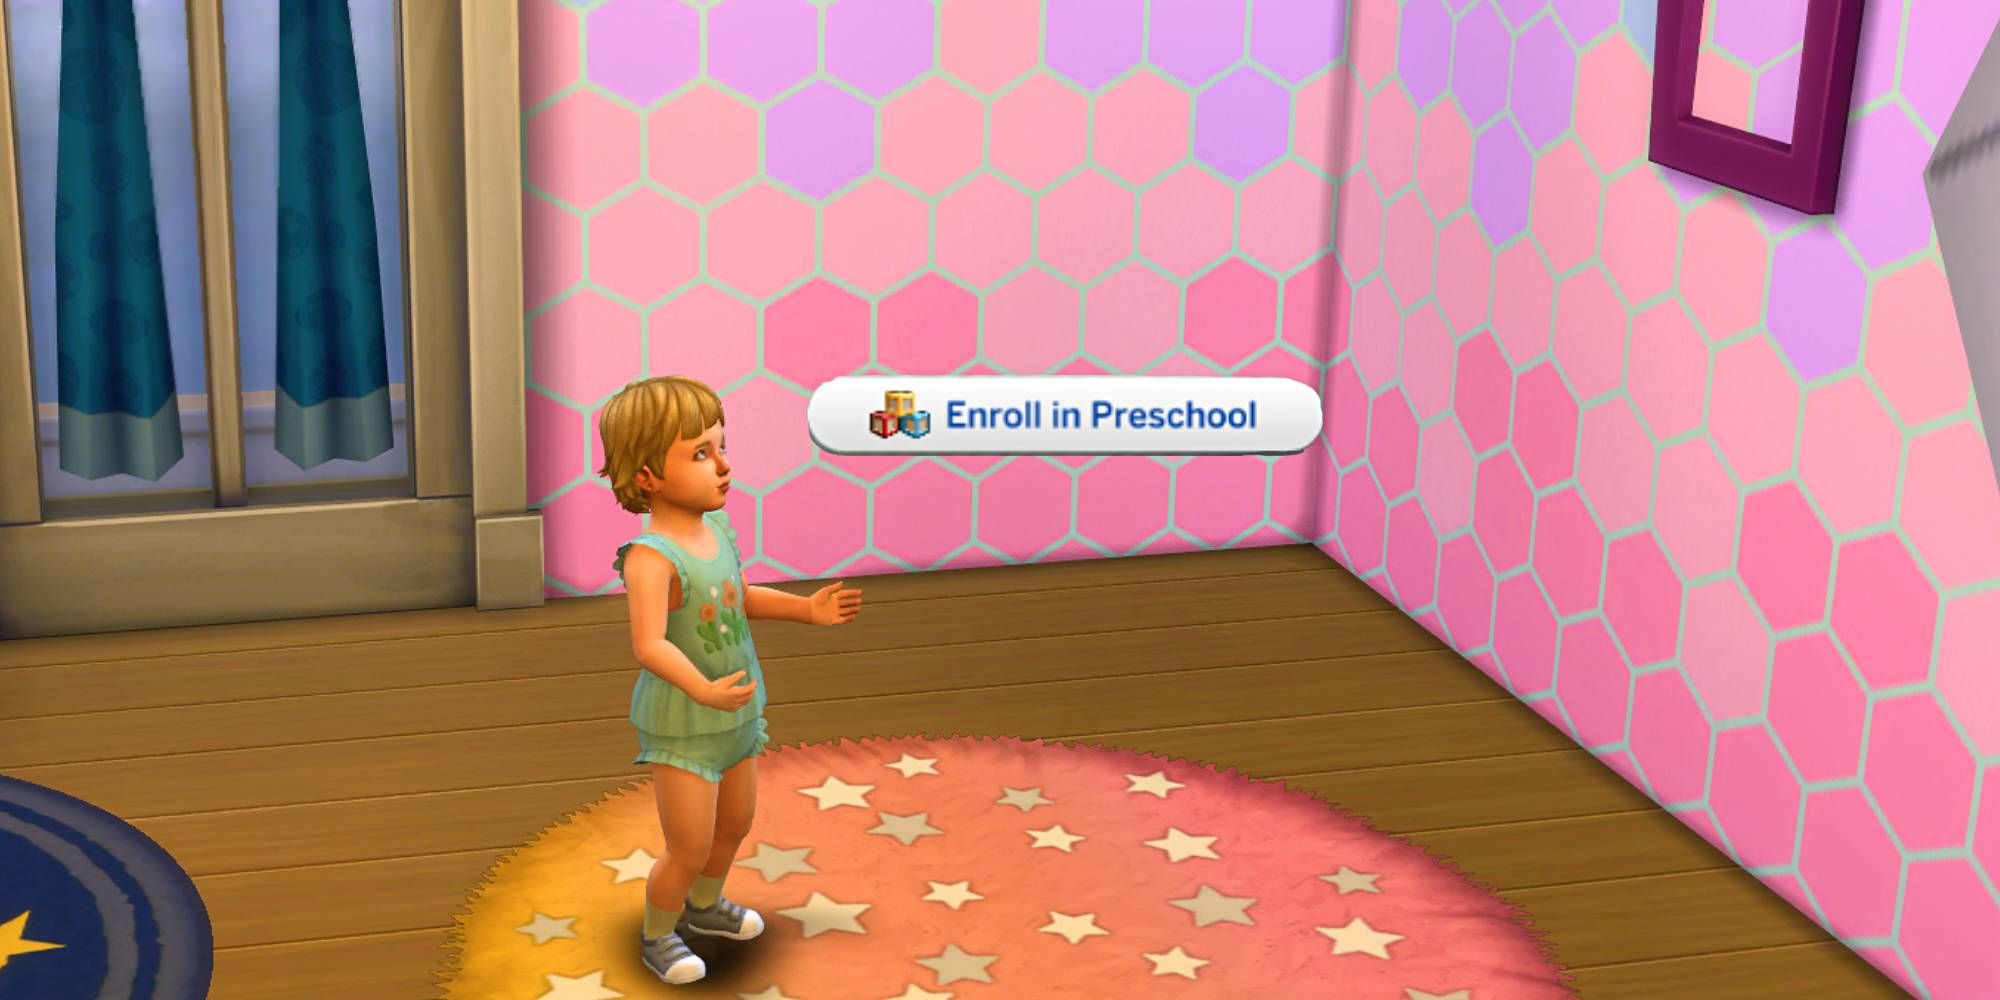 A toddler in The Sims 4 with the interaction bubble for Enroll in Preschool